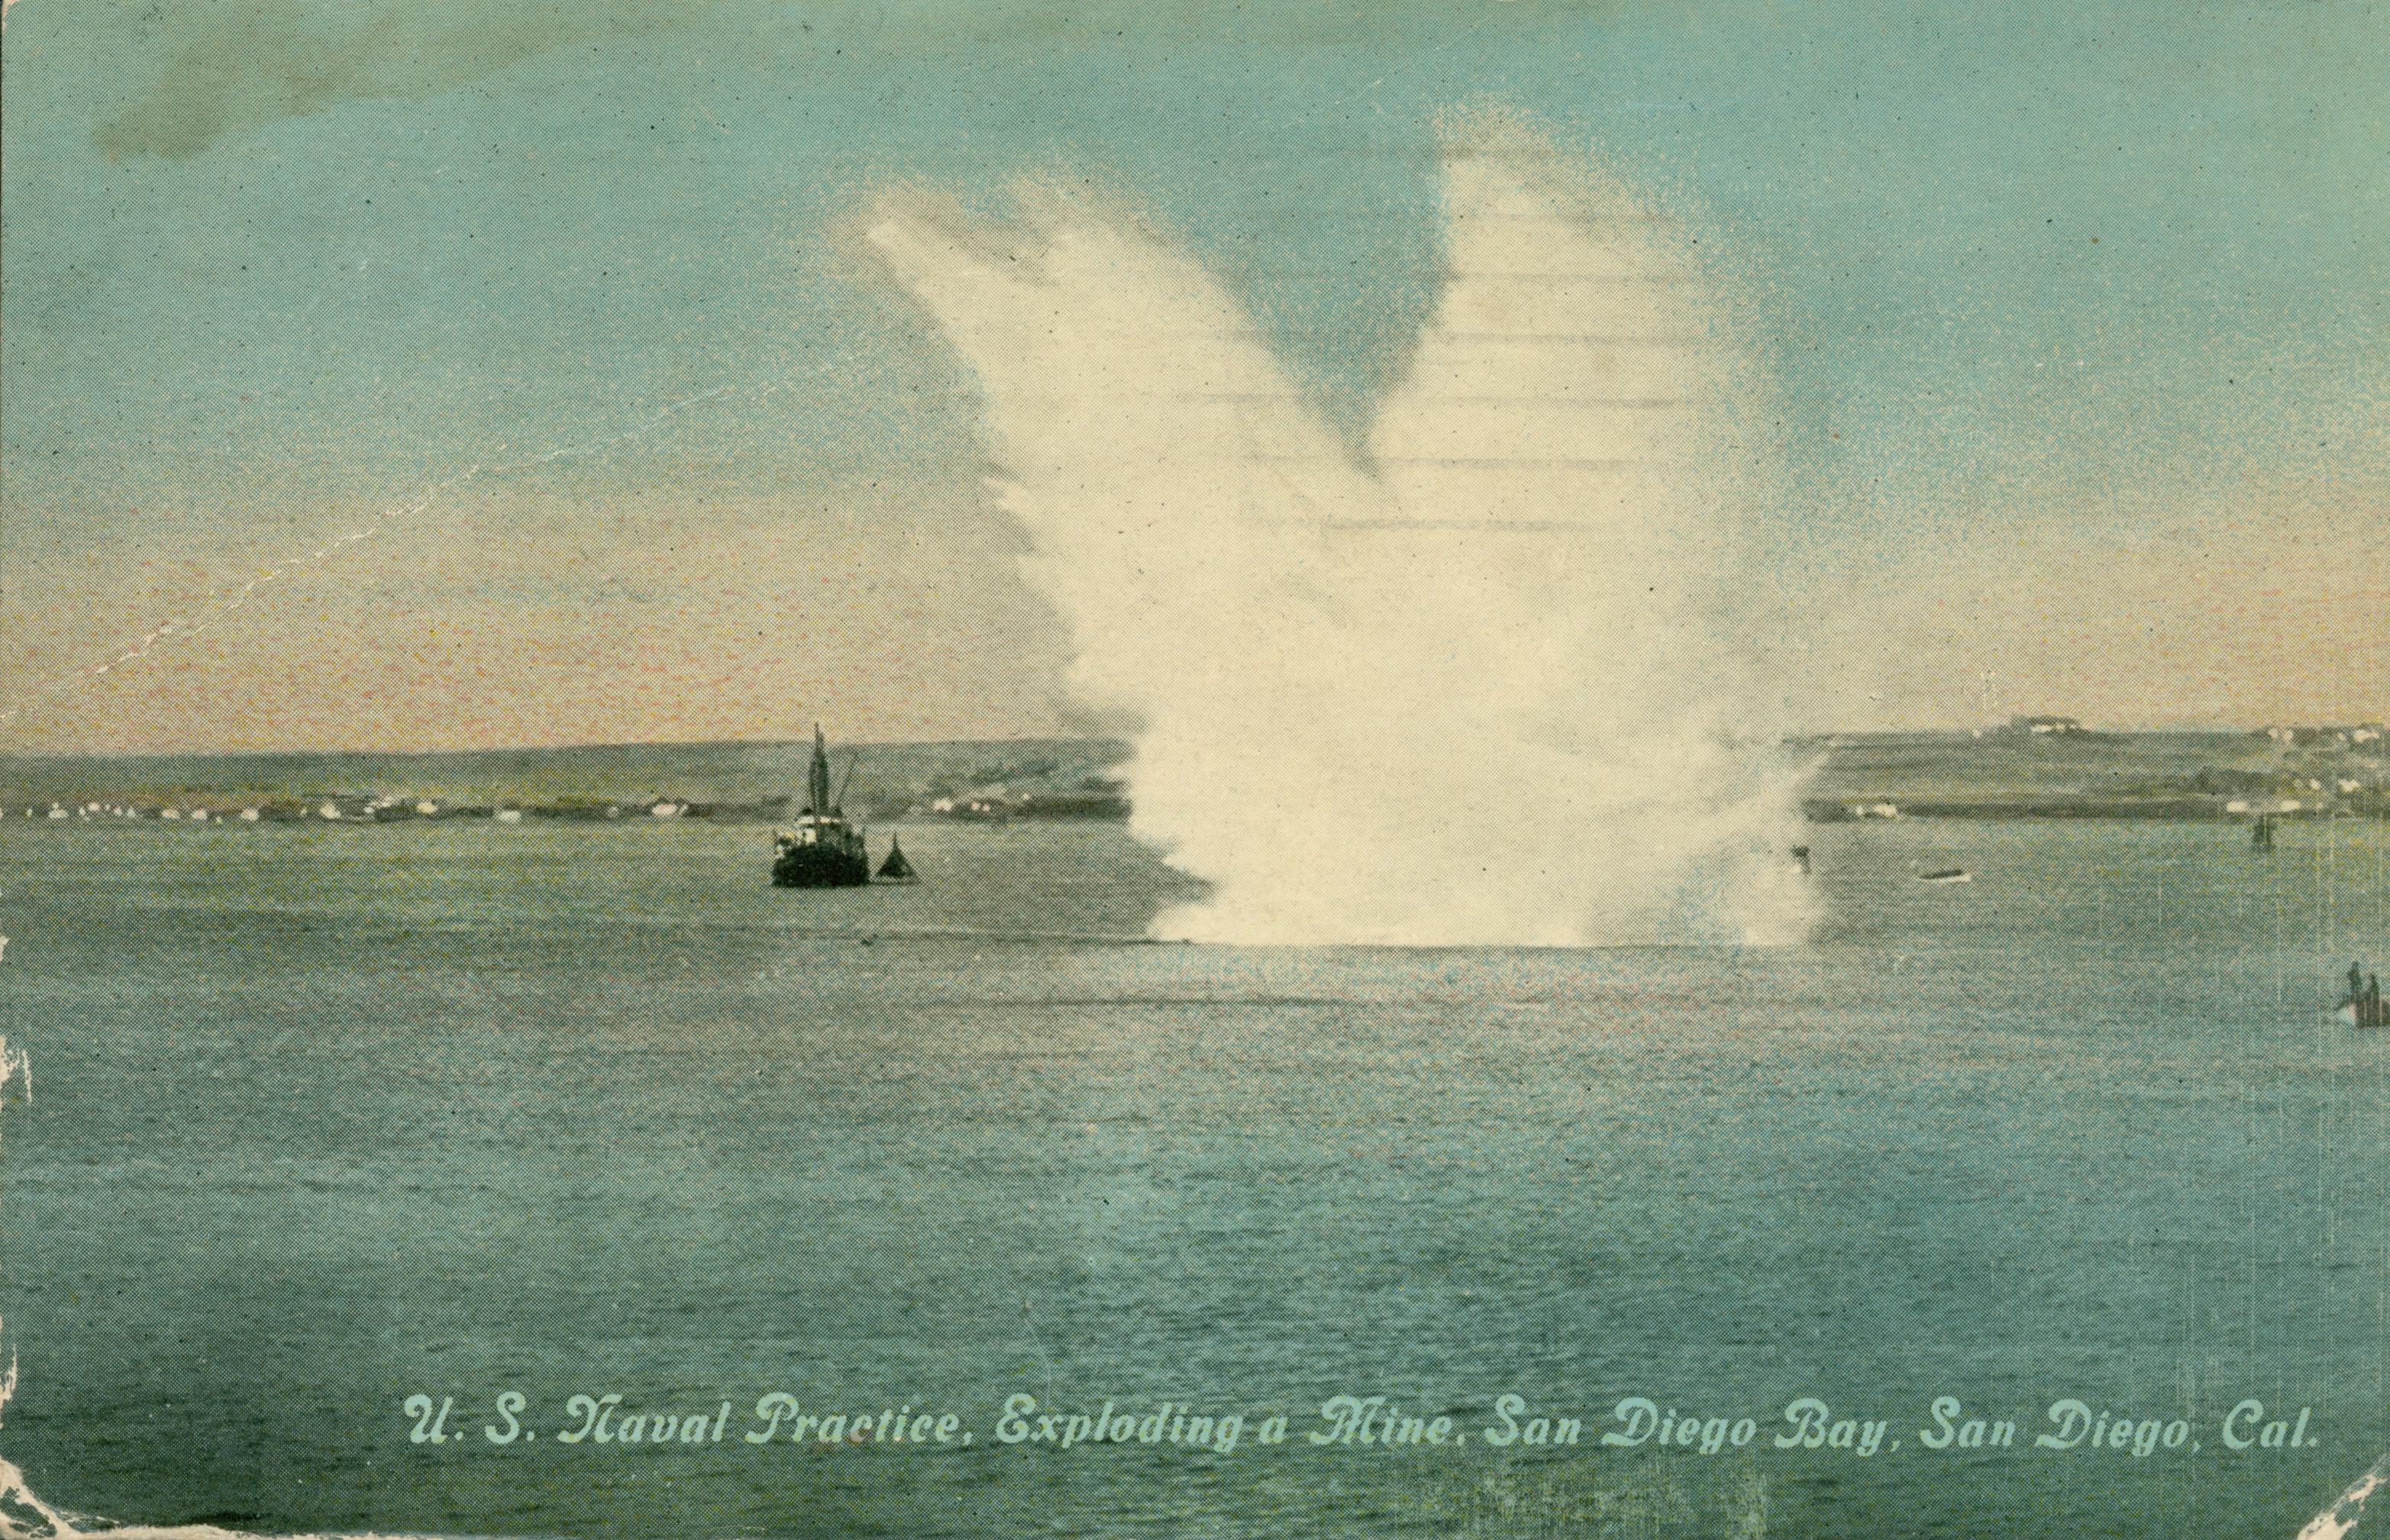 Shows a mine exploding in the bay